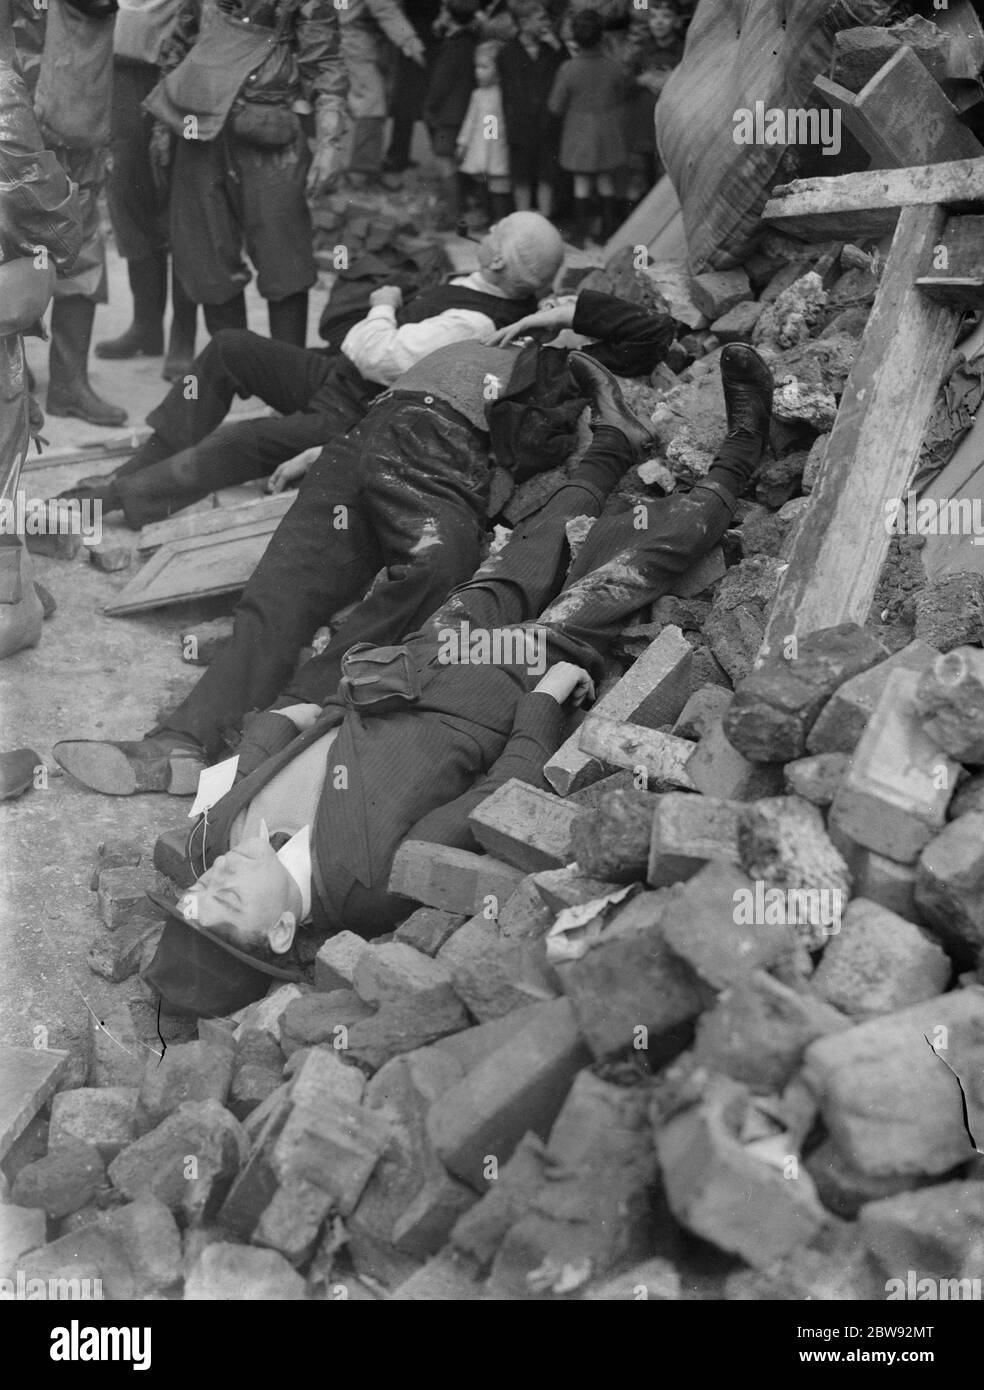 Air Raid Precaution exercise on Old Kent Road in London . Spectators gather round to see the ' casualties ' which are strewn across the rubble during the drill . 1939 . Stock Photo